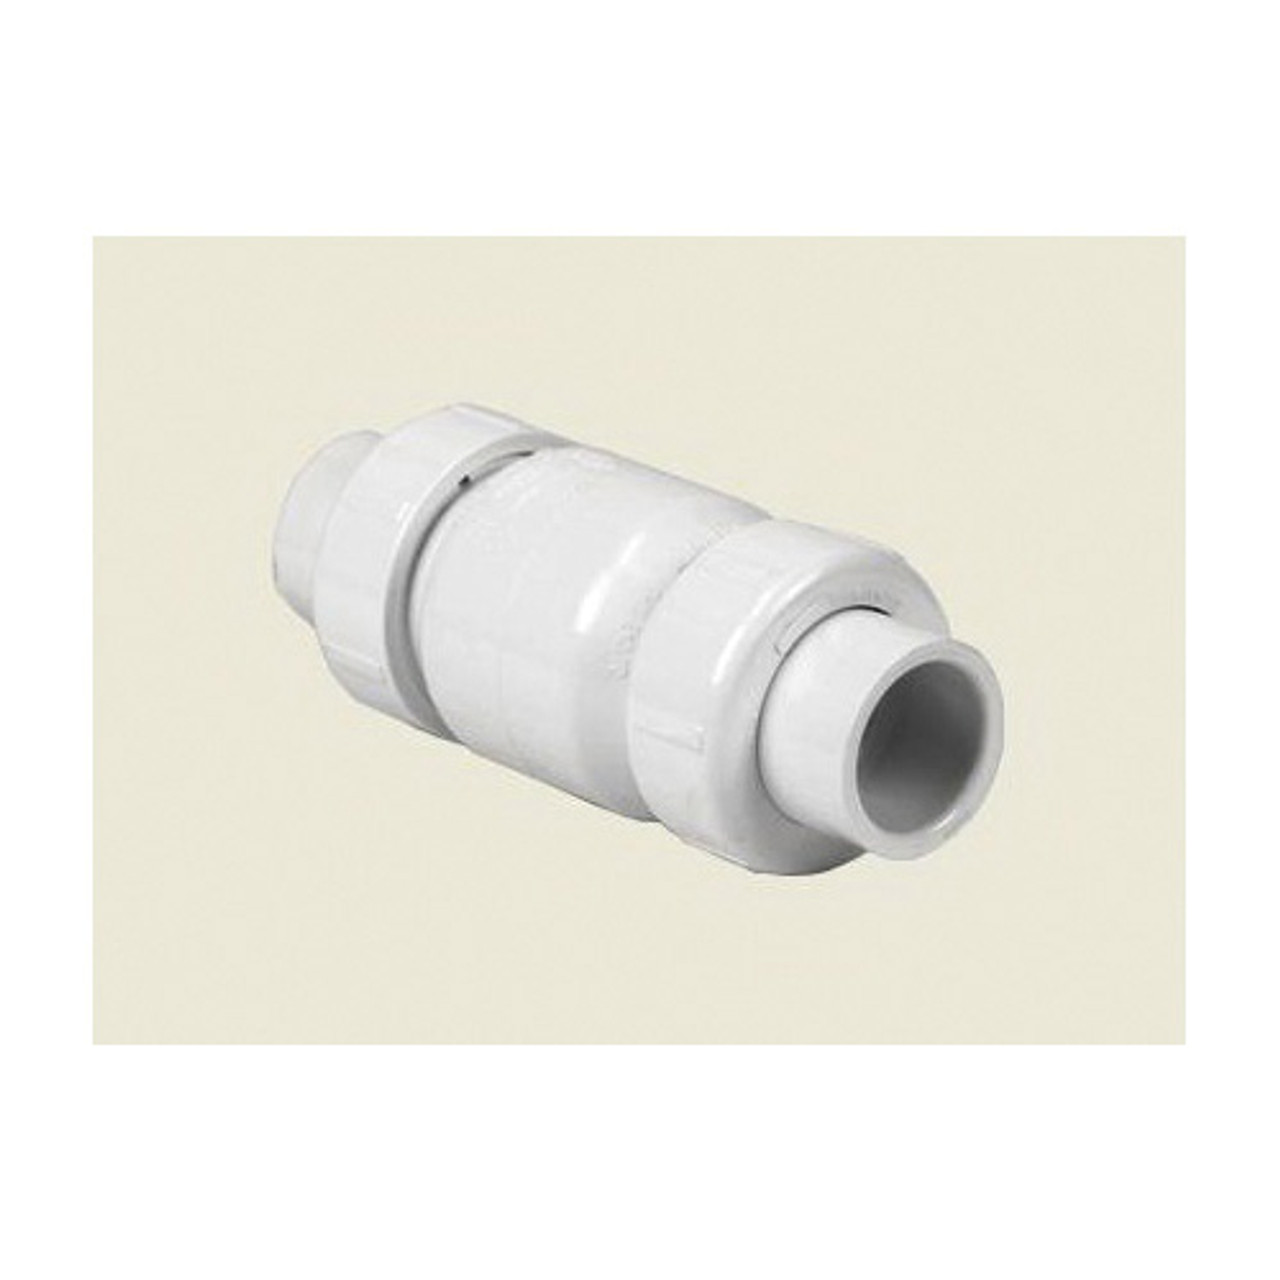 Spears True Union Utility Swing Check Valve, 3 in Nominal, Socket End Style, PVC Body